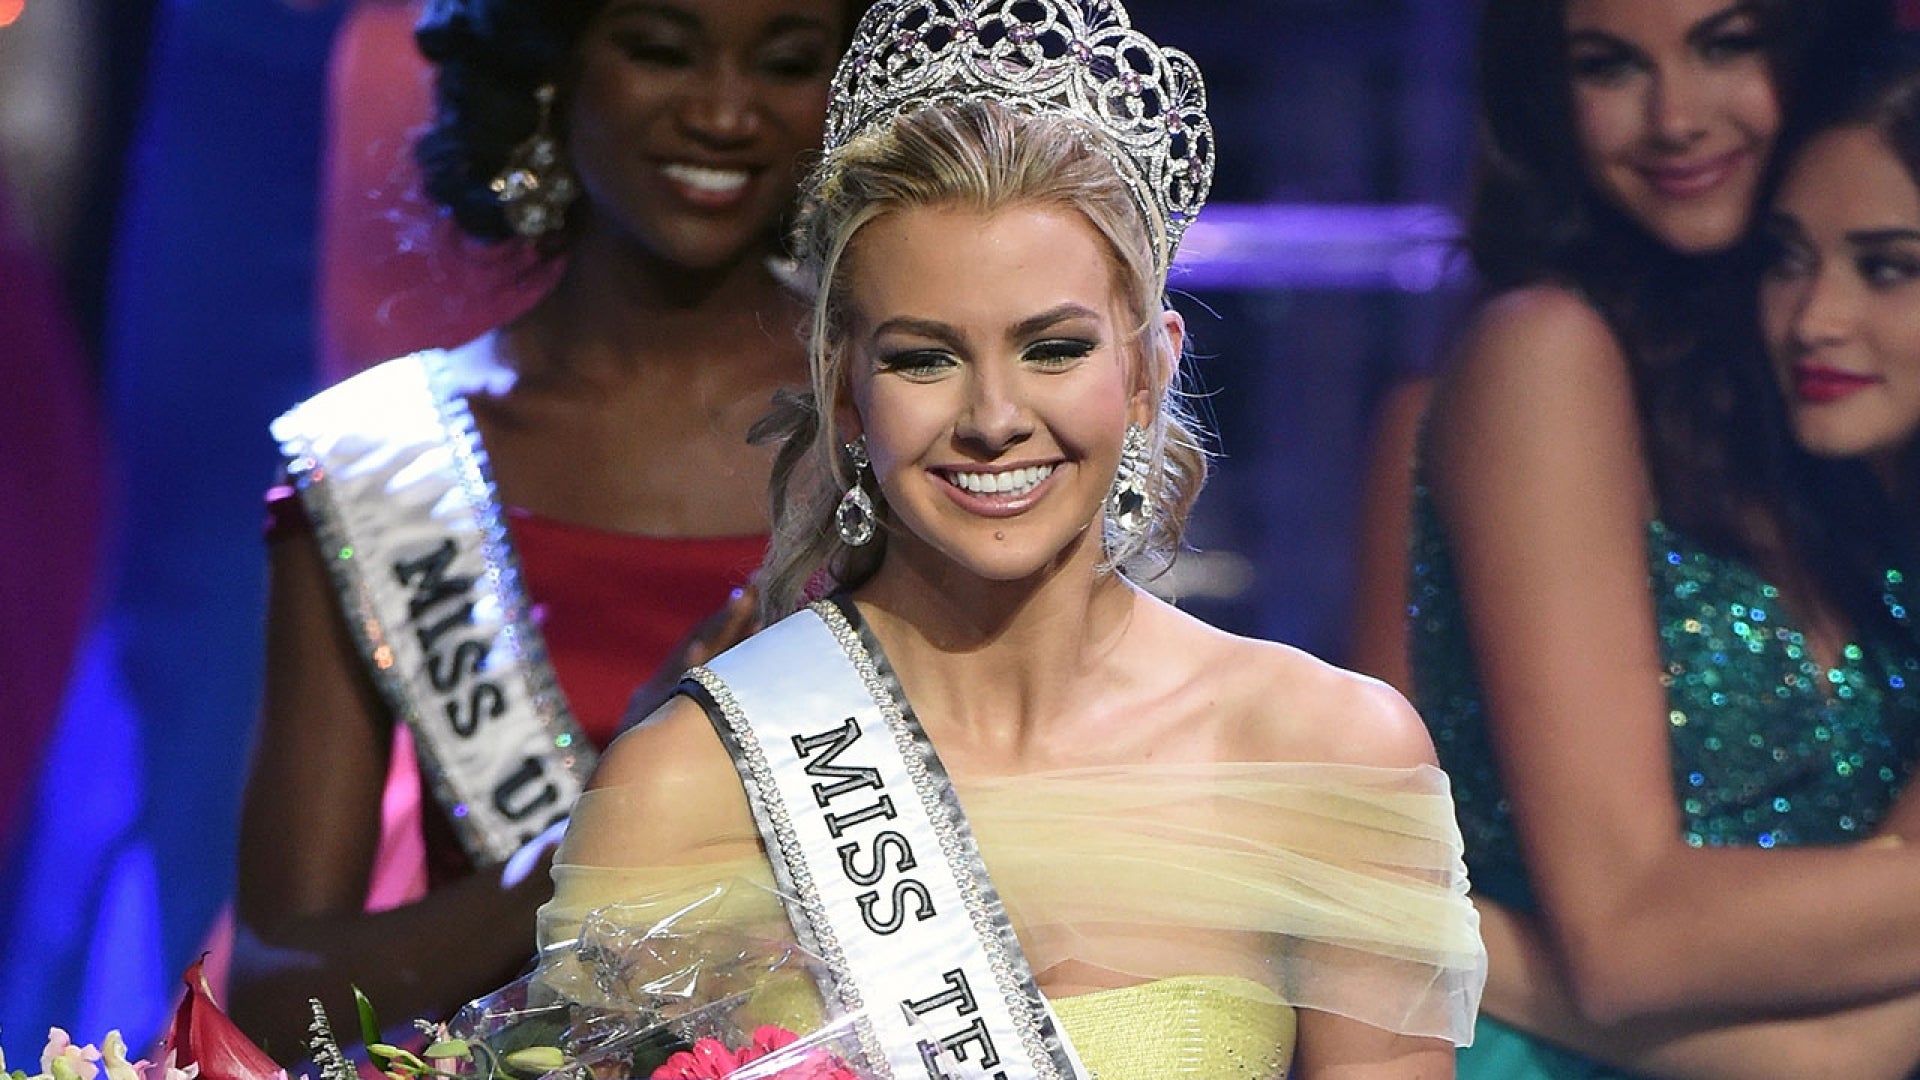 Miss Teen Usa Karlie Hay Explains Her Offensive Tweets In Official Apology